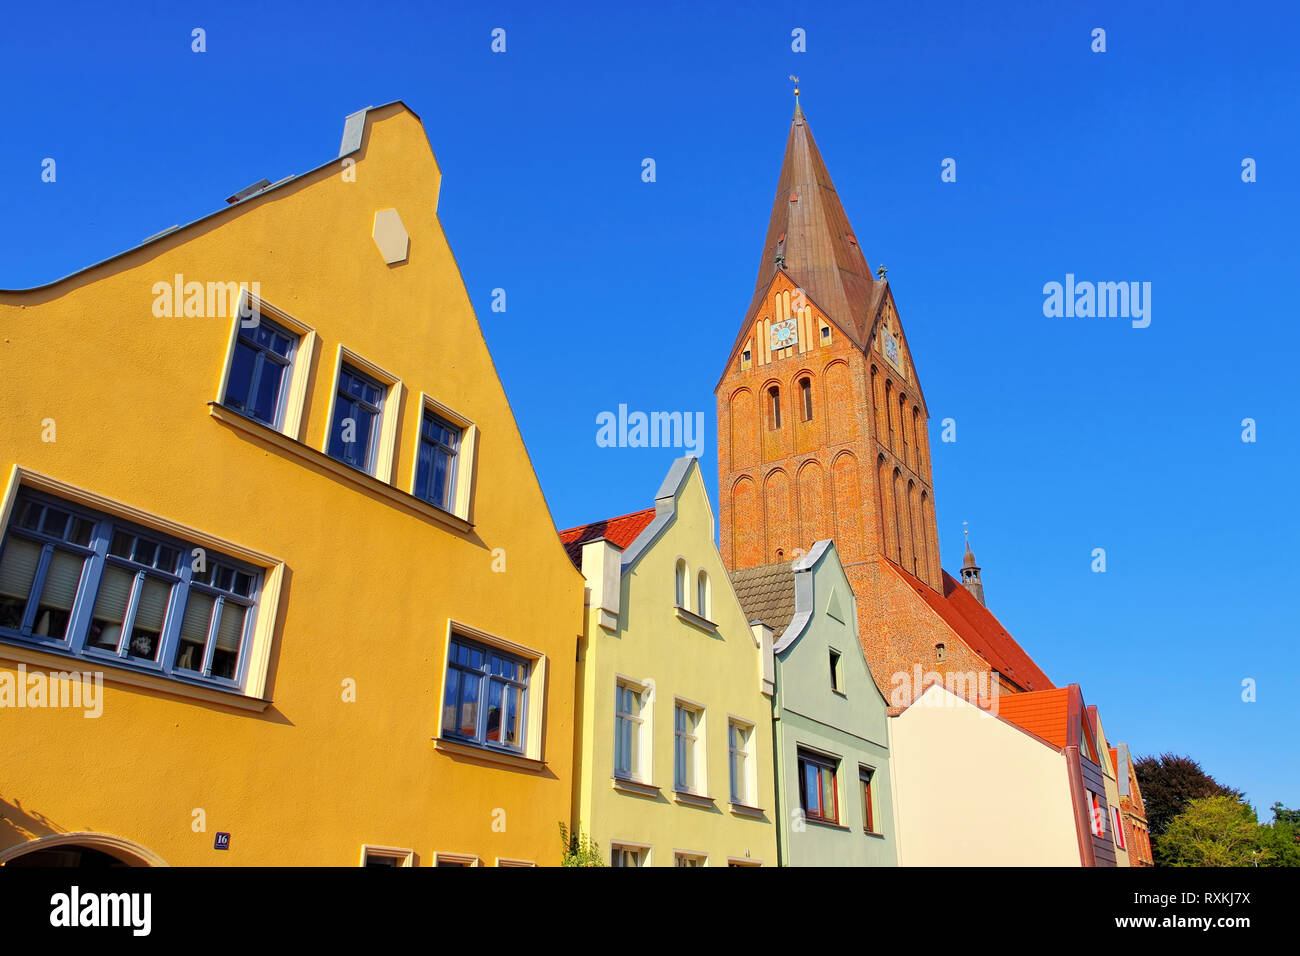 Barth city and church, an old town on the Bodden in Germany Stock Photo